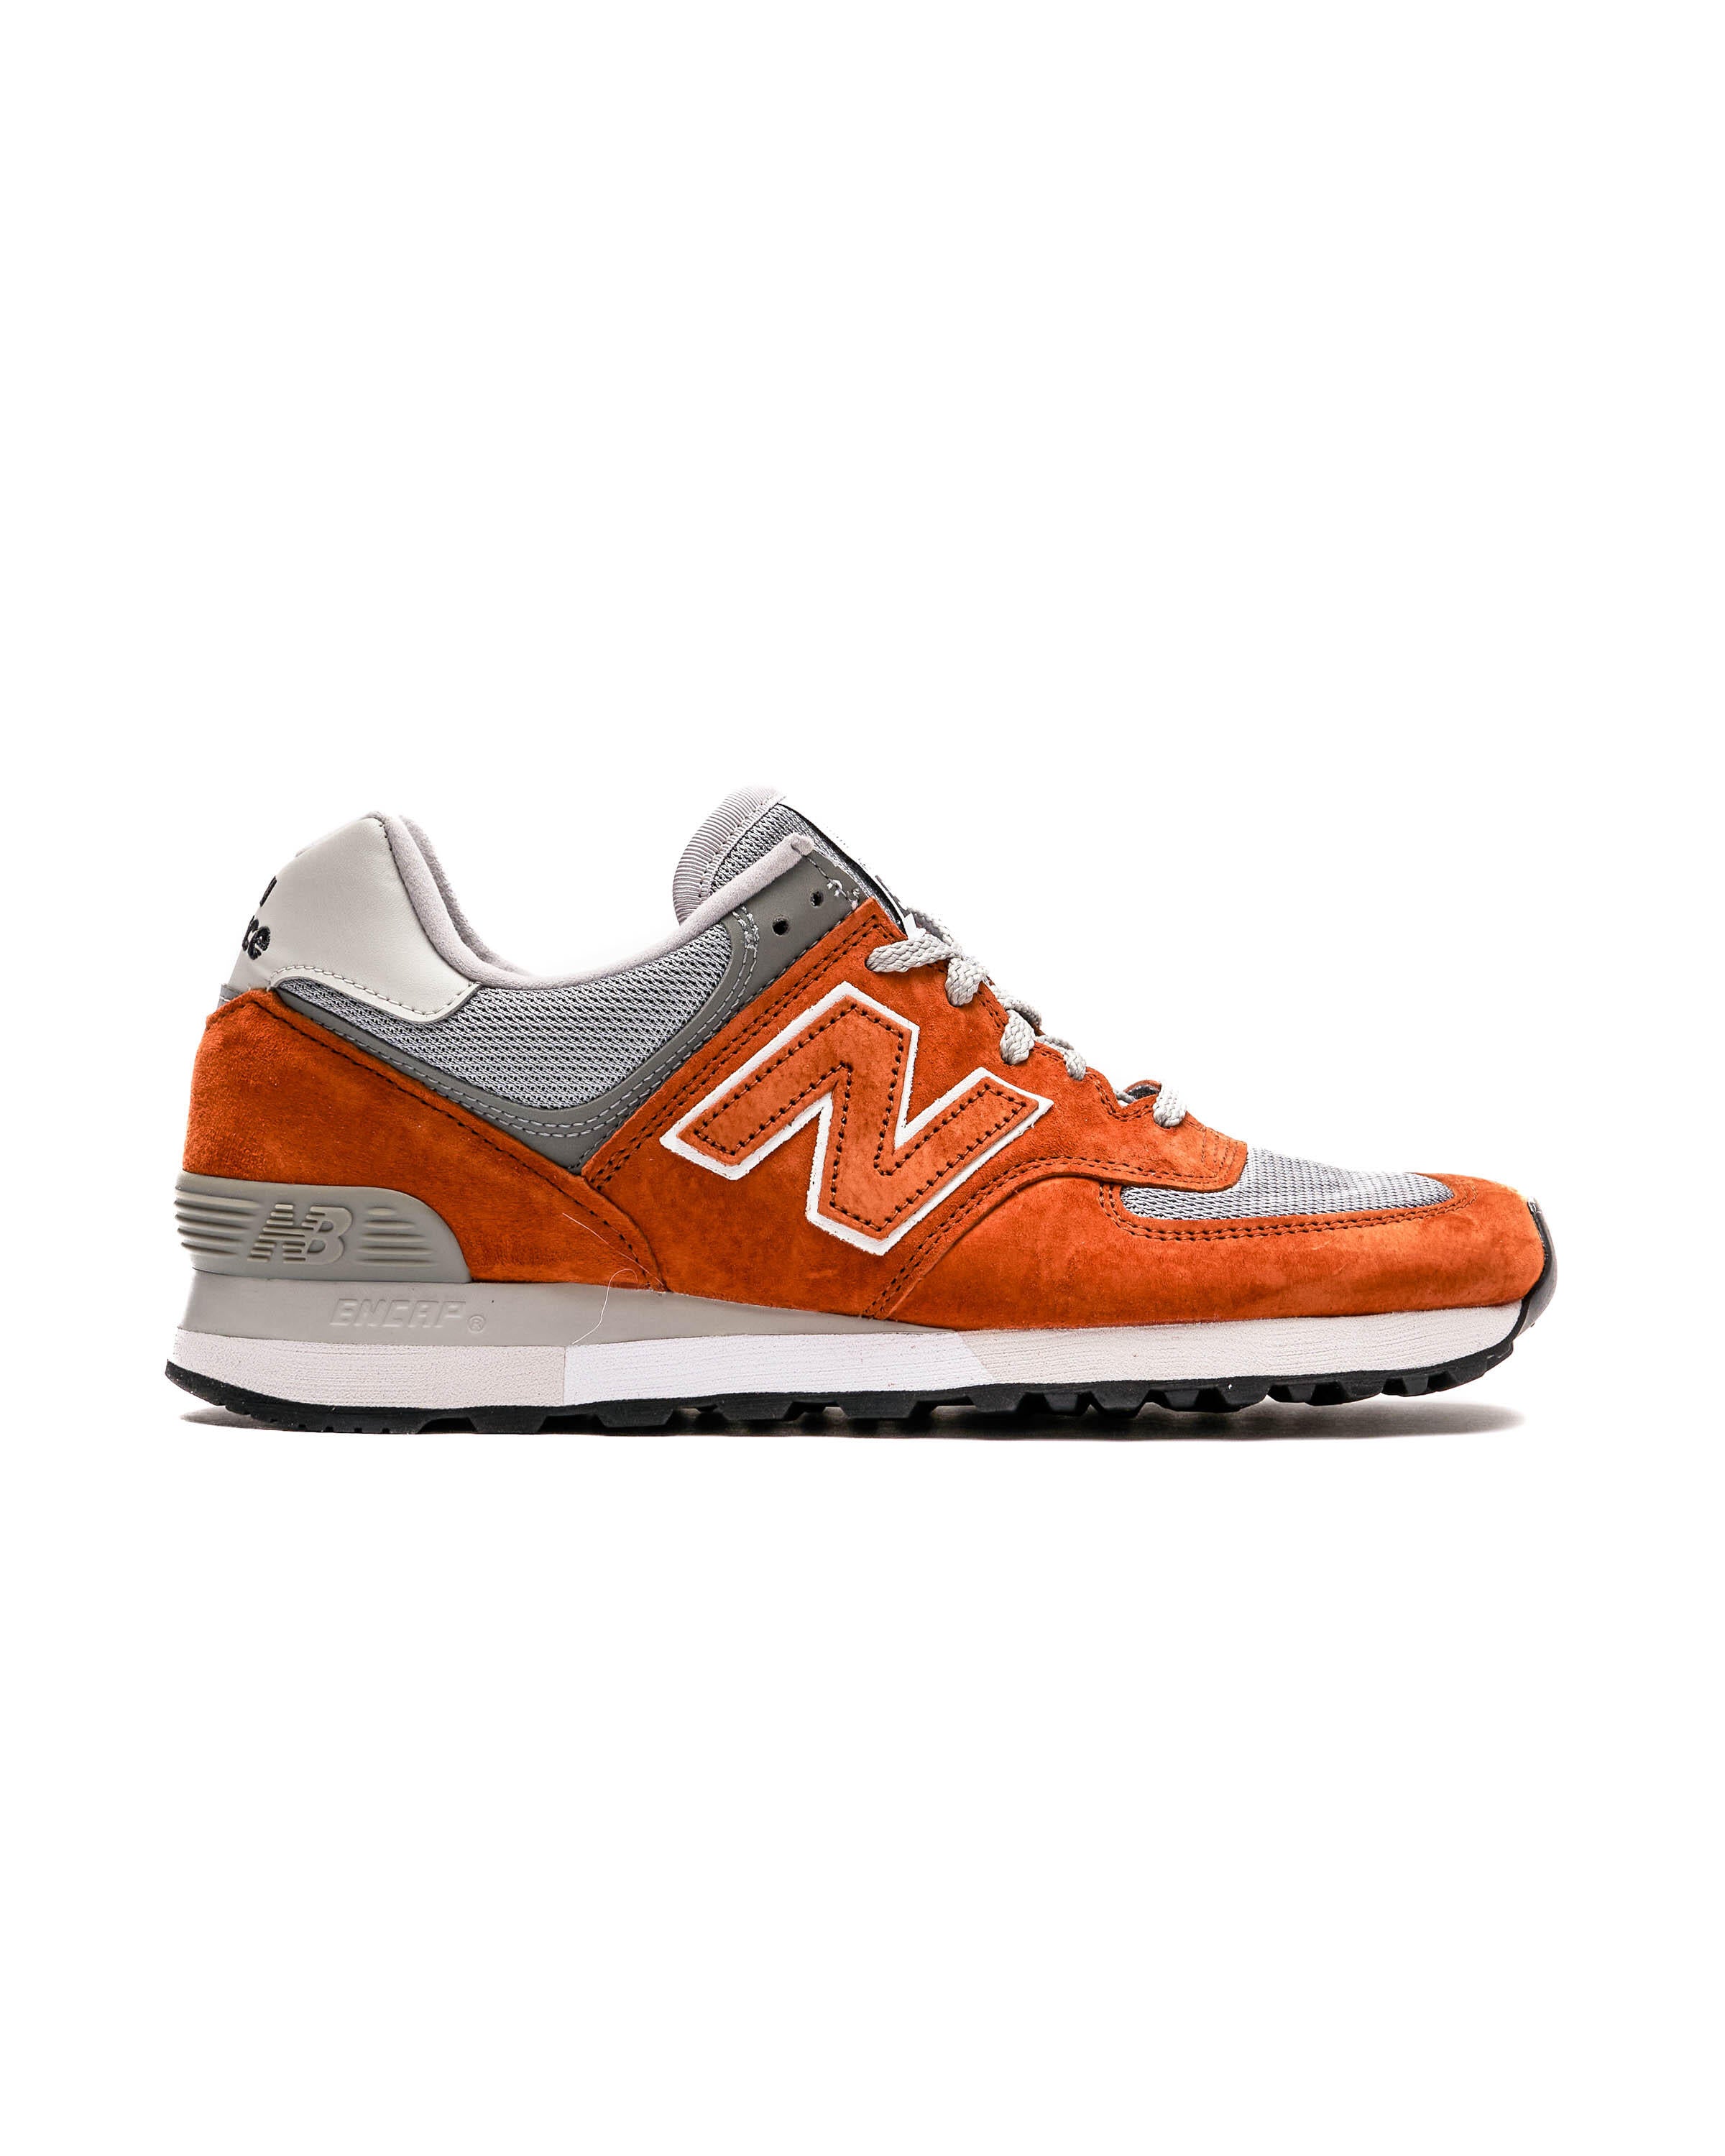 New Balance OU 576 FLB - Made in England | OU576FLB | AFEW STORE